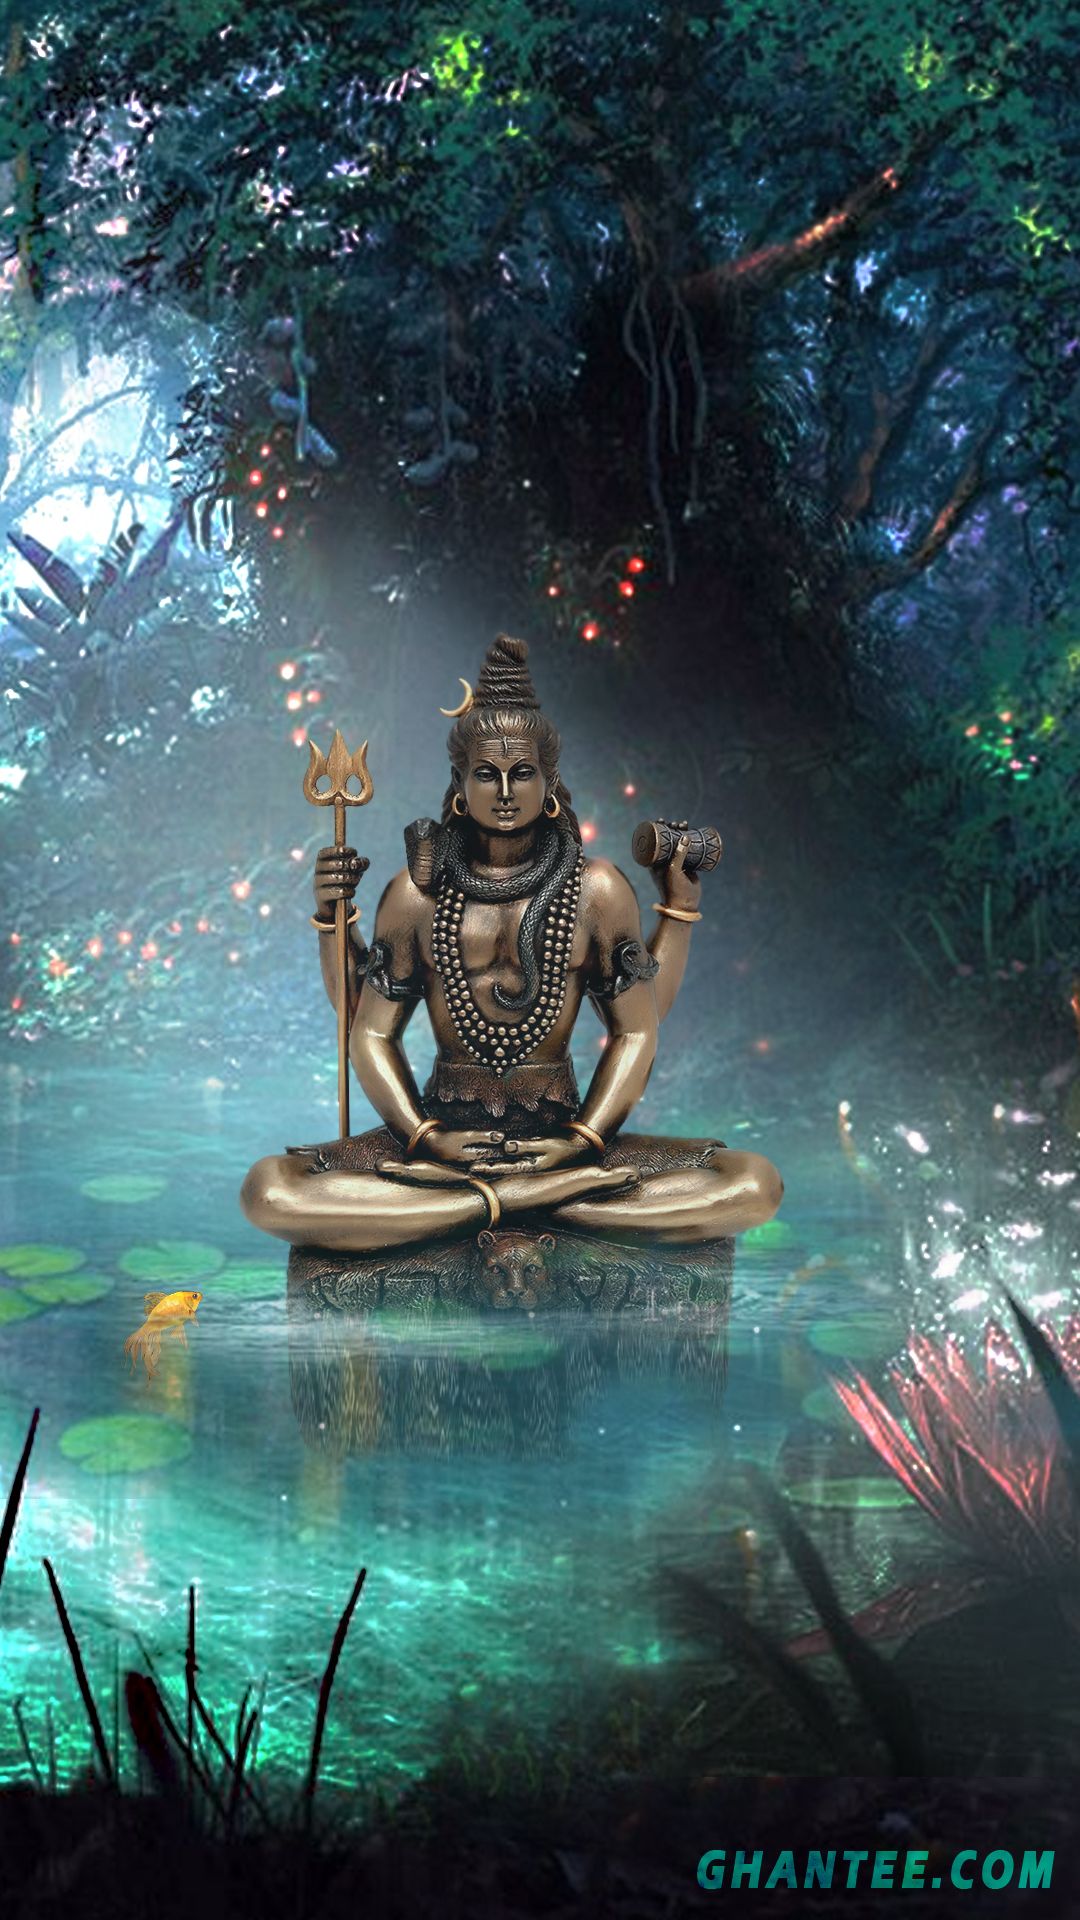 Download Lord shiva wallpaper by theaatma - bcc4 - Free on ZEDGE™ now.  Browse millions of popular hinduism Wall… | Shiva wallpaper, Lord shiva hd  images, Lord shiva